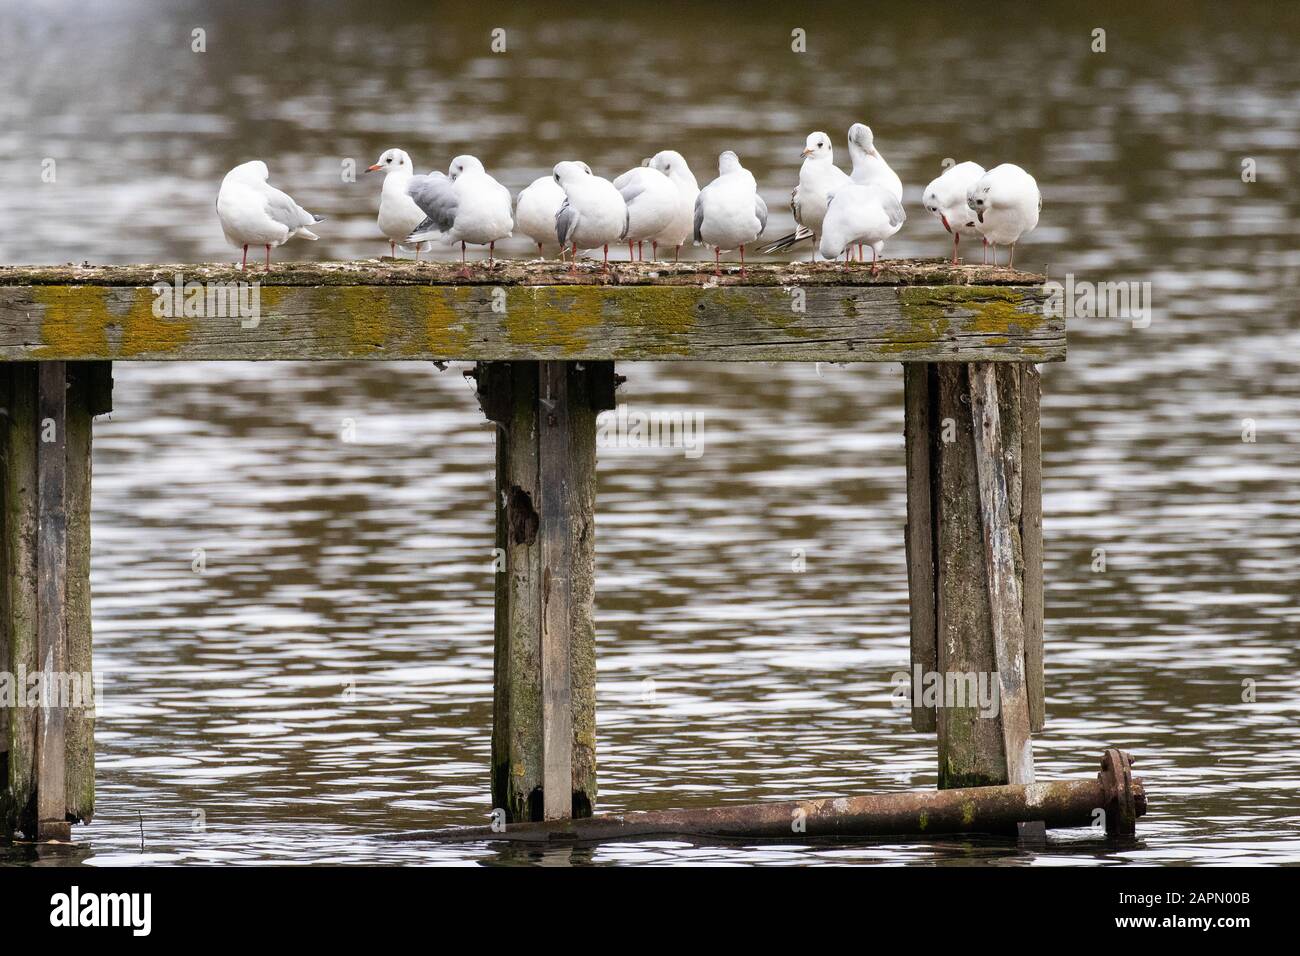 A collection of seagulls preening on a rotten old jetty Stock Photo